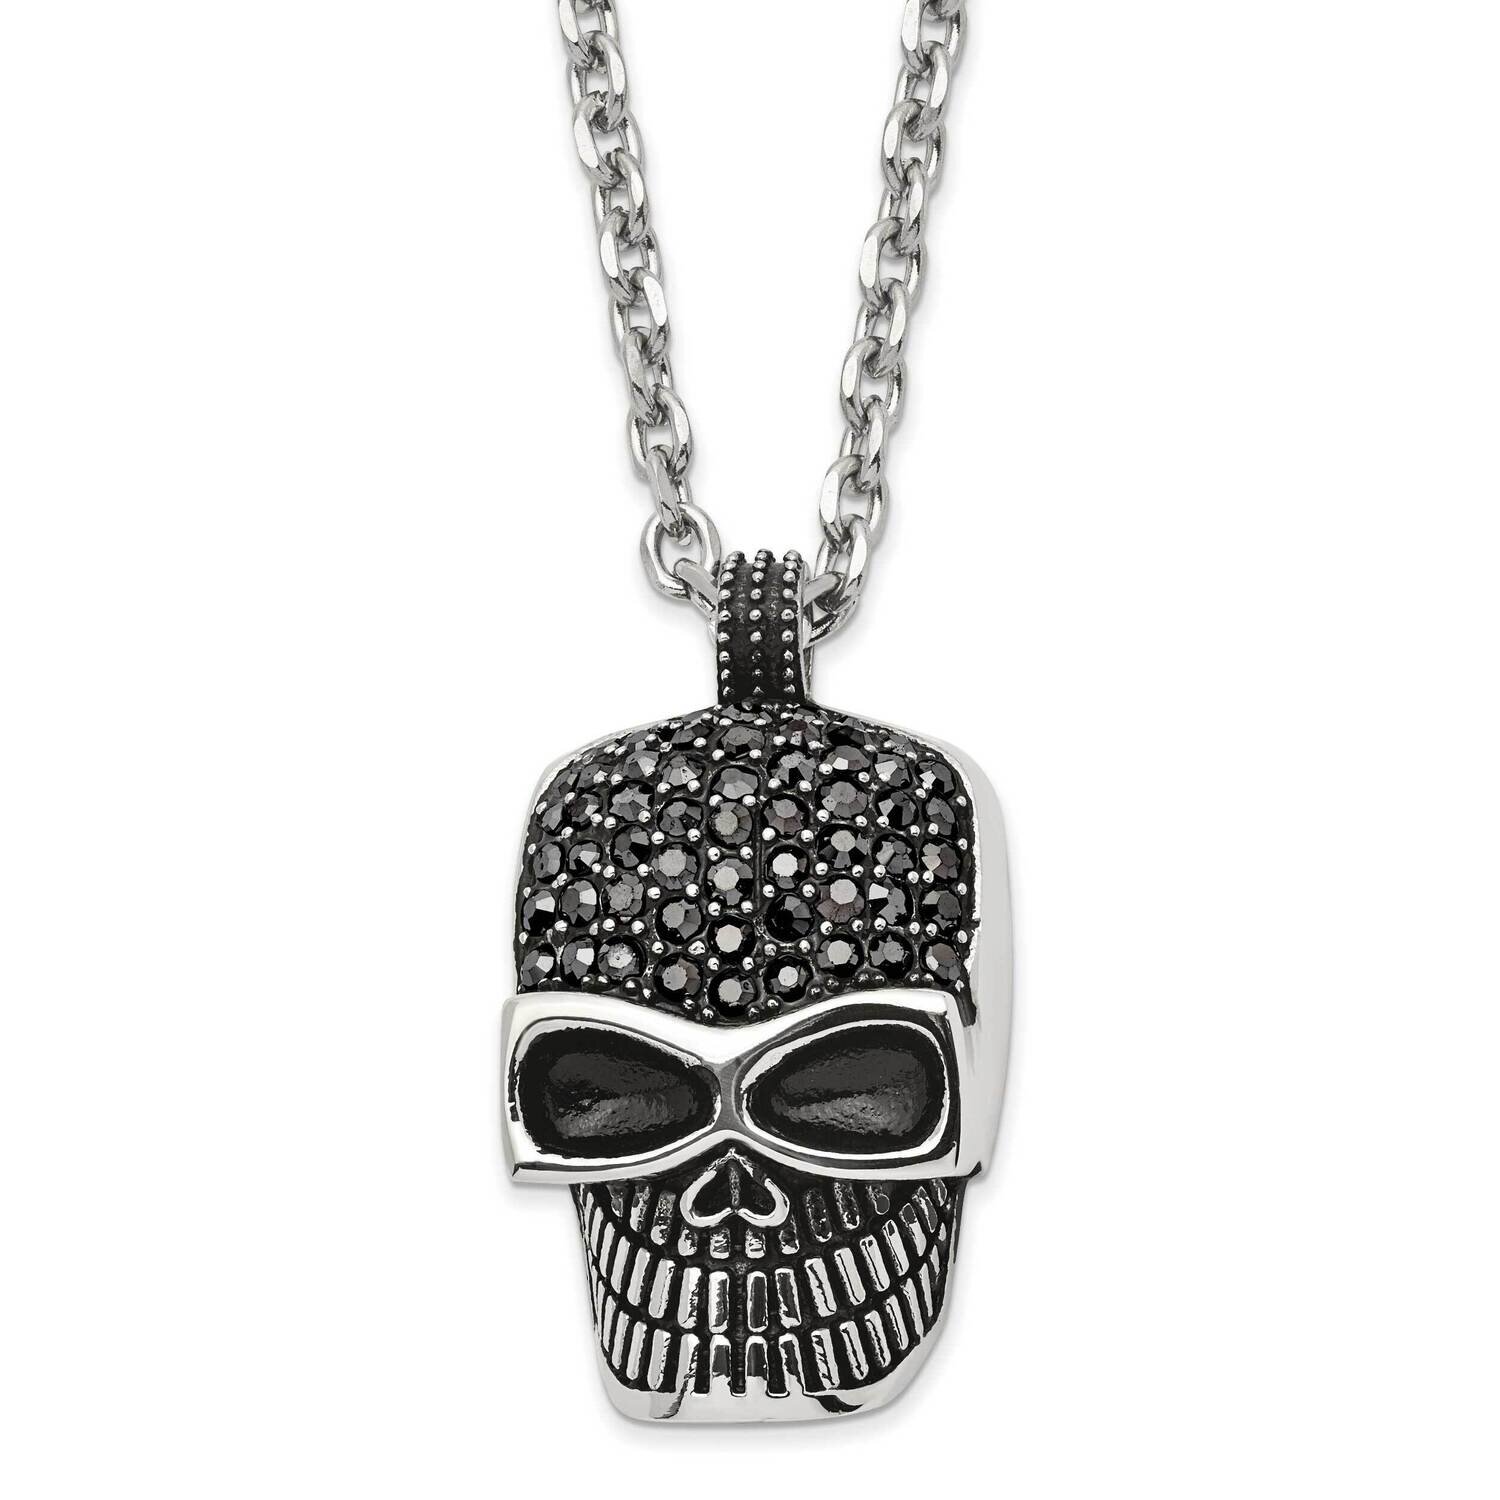 24 Inch Polished and Antiqued with Black Crystal Skull Neckla Stainless Steel SRN2862-24